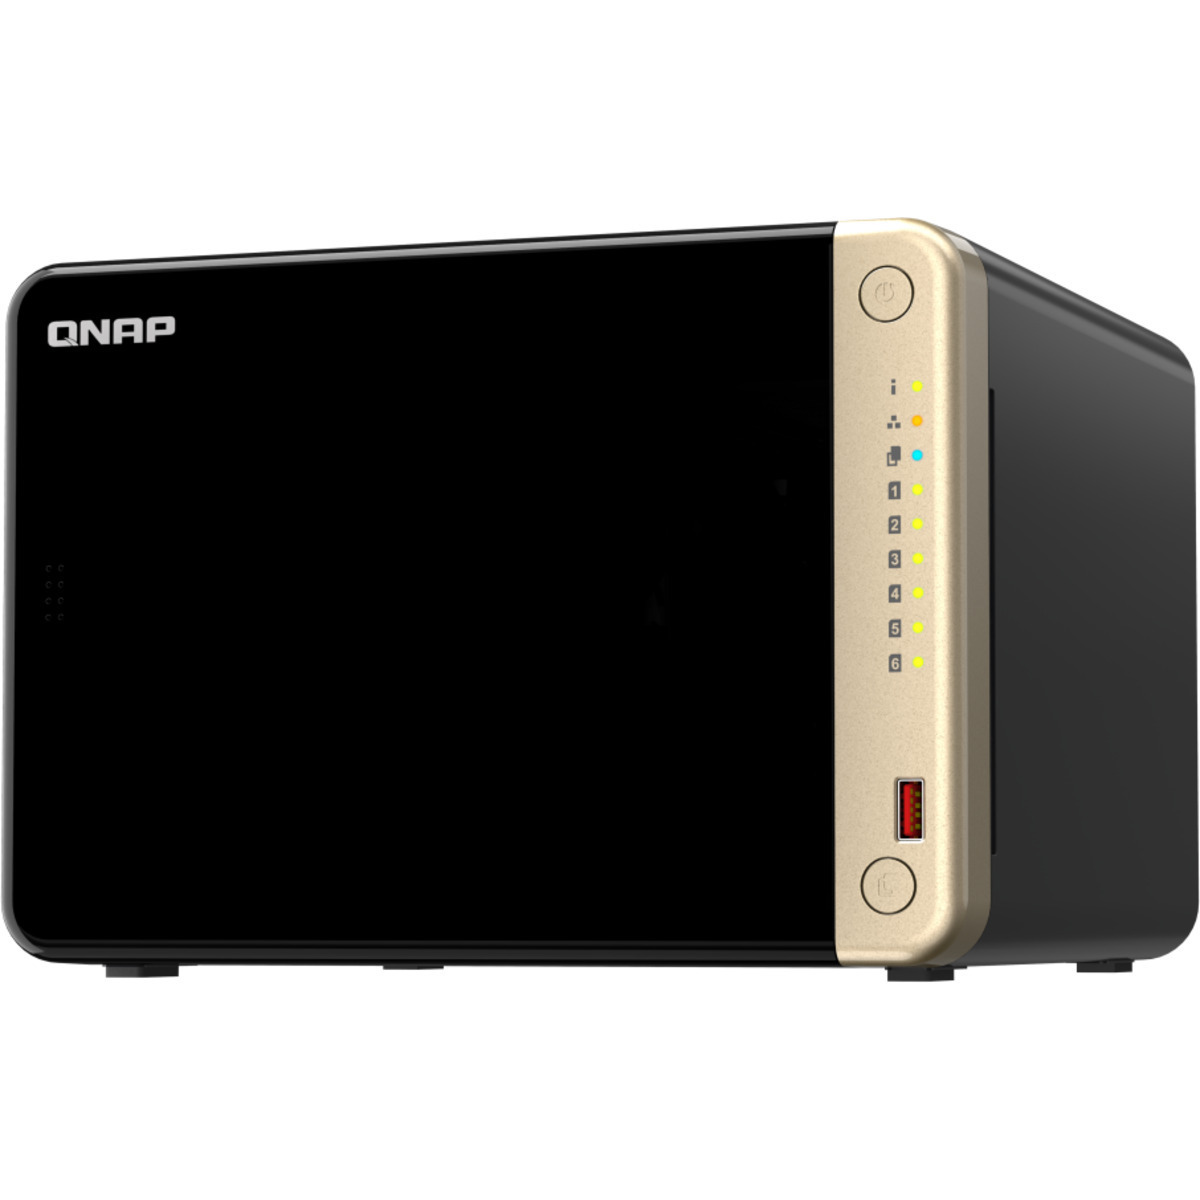 buy $1241 QNAP TS-664 12tb Desktop NAS - Network Attached Storage Device 6x2000gb Seagate BarraCuda ST2000DM008 3.5 7200rpm SATA 6Gb/s HDD CONSUMER Class Drives Installed - Burn-In Tested - ON SALE - FREE RAM UPGRADE - nas headquarters buy network attached storage server device das new raid-5 free shipping usa TS-664